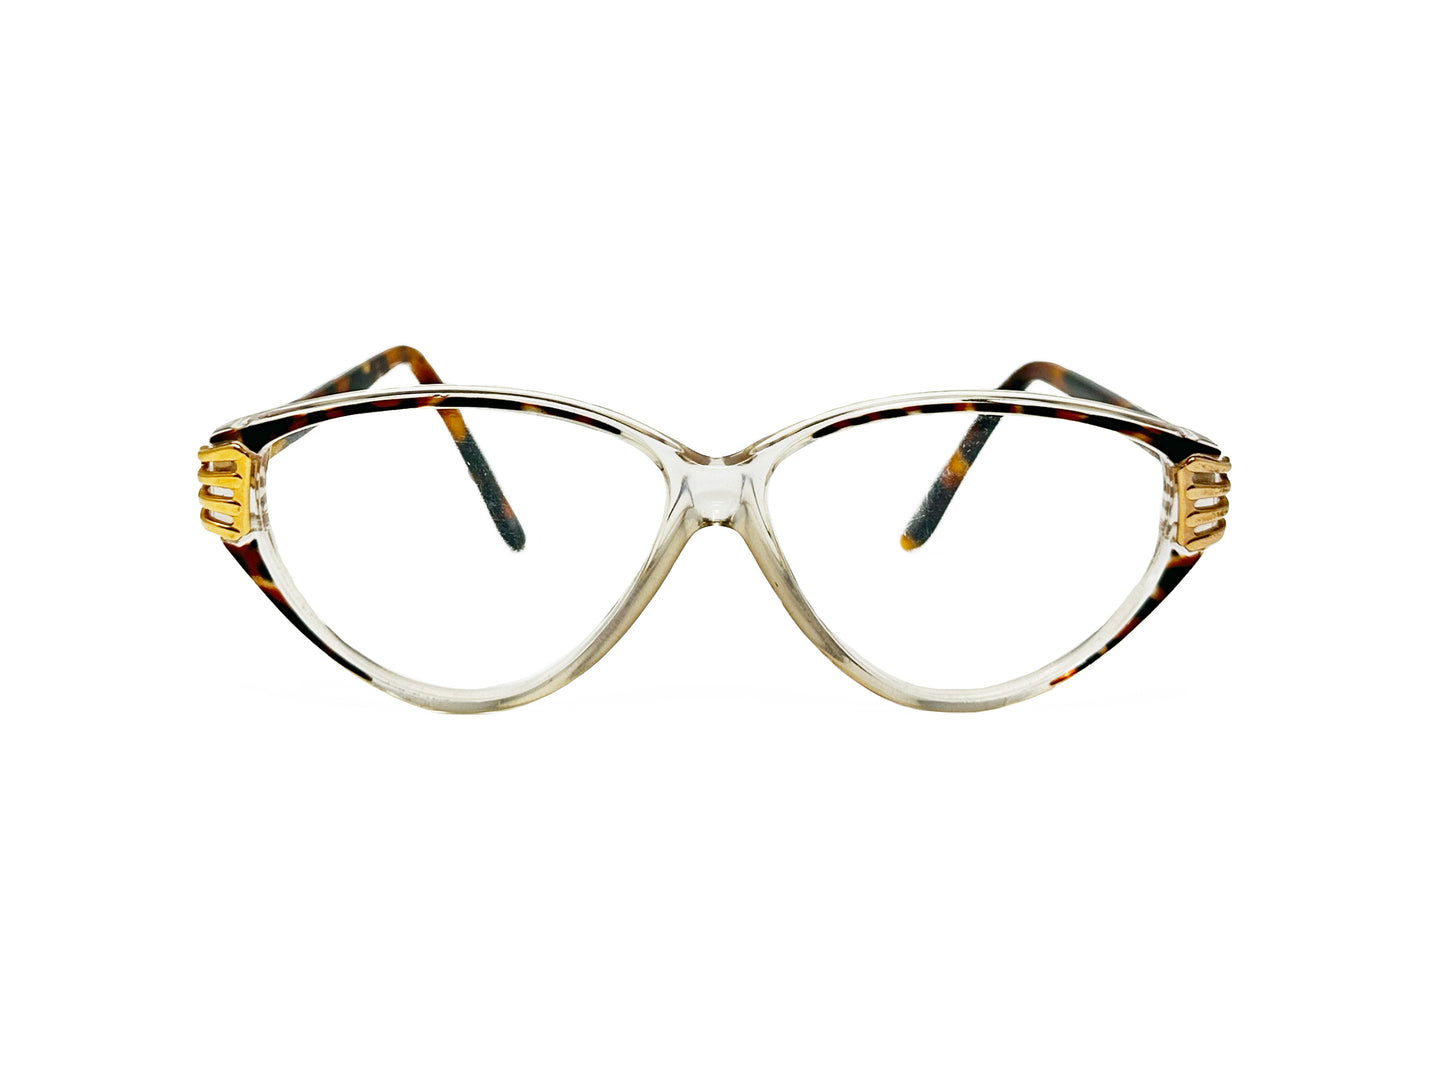 Britalia triangular acetate optical frame with gold metal on corners. Model: Evelyn. Color: C2 - Transparent with tortoise temples. Front view. 